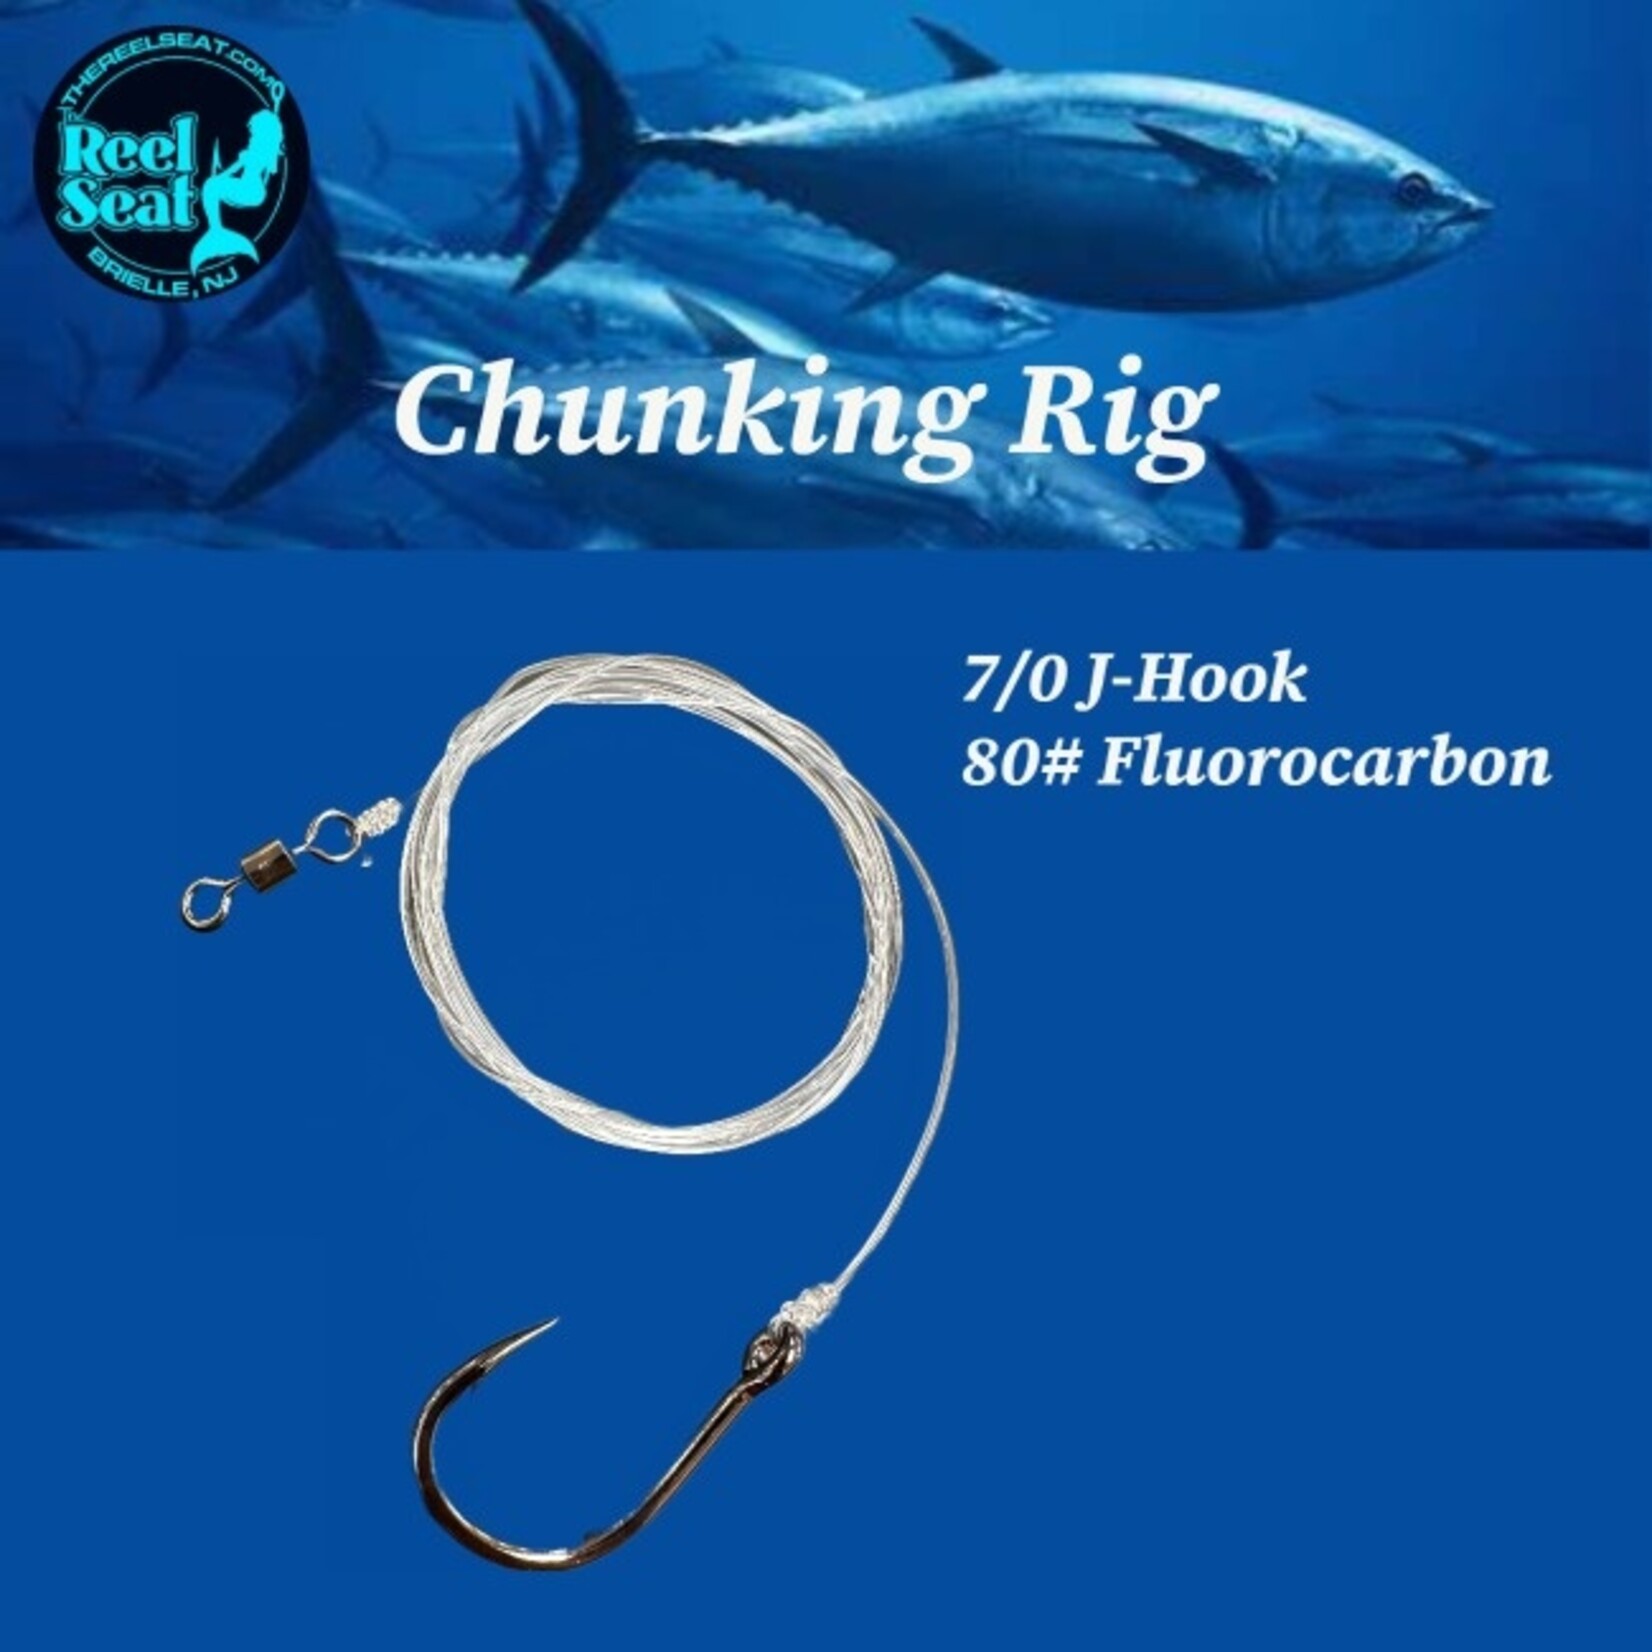 The Reel Seat RS Chunking Rig 7/0 J-hook 80lbs Fluorocarbon